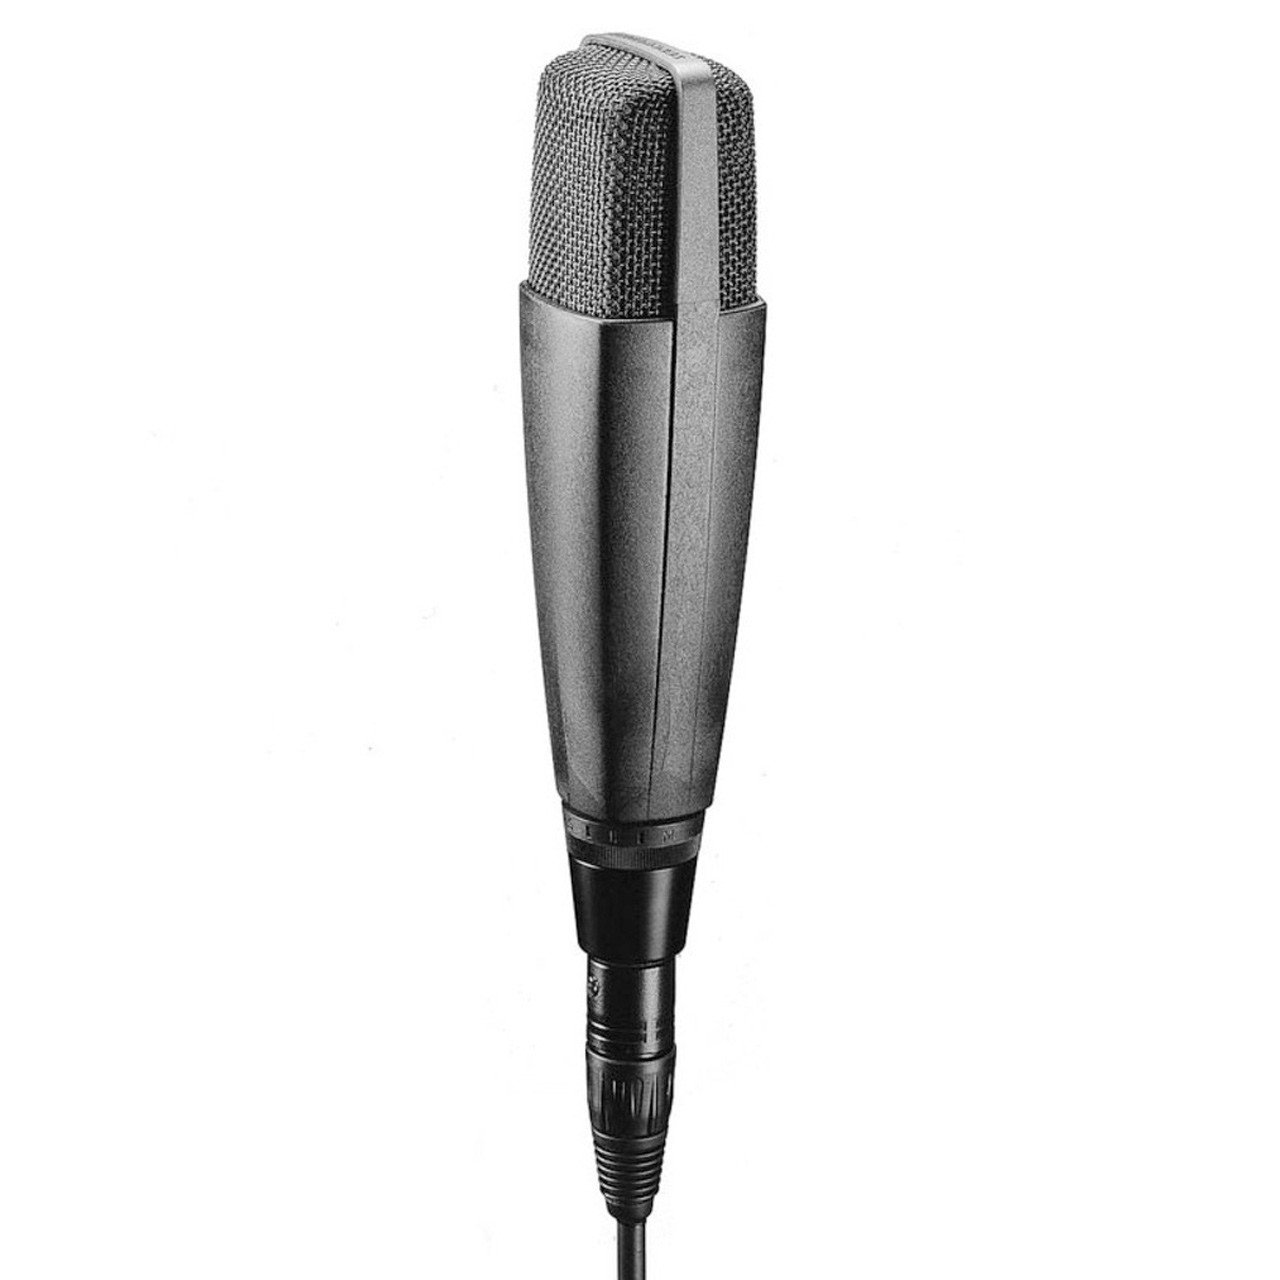 Sennheiser MD 421-II Cardioid Dynamic Microphone with Lock-On Stand Adapter 5-Position Bass Roll-Off